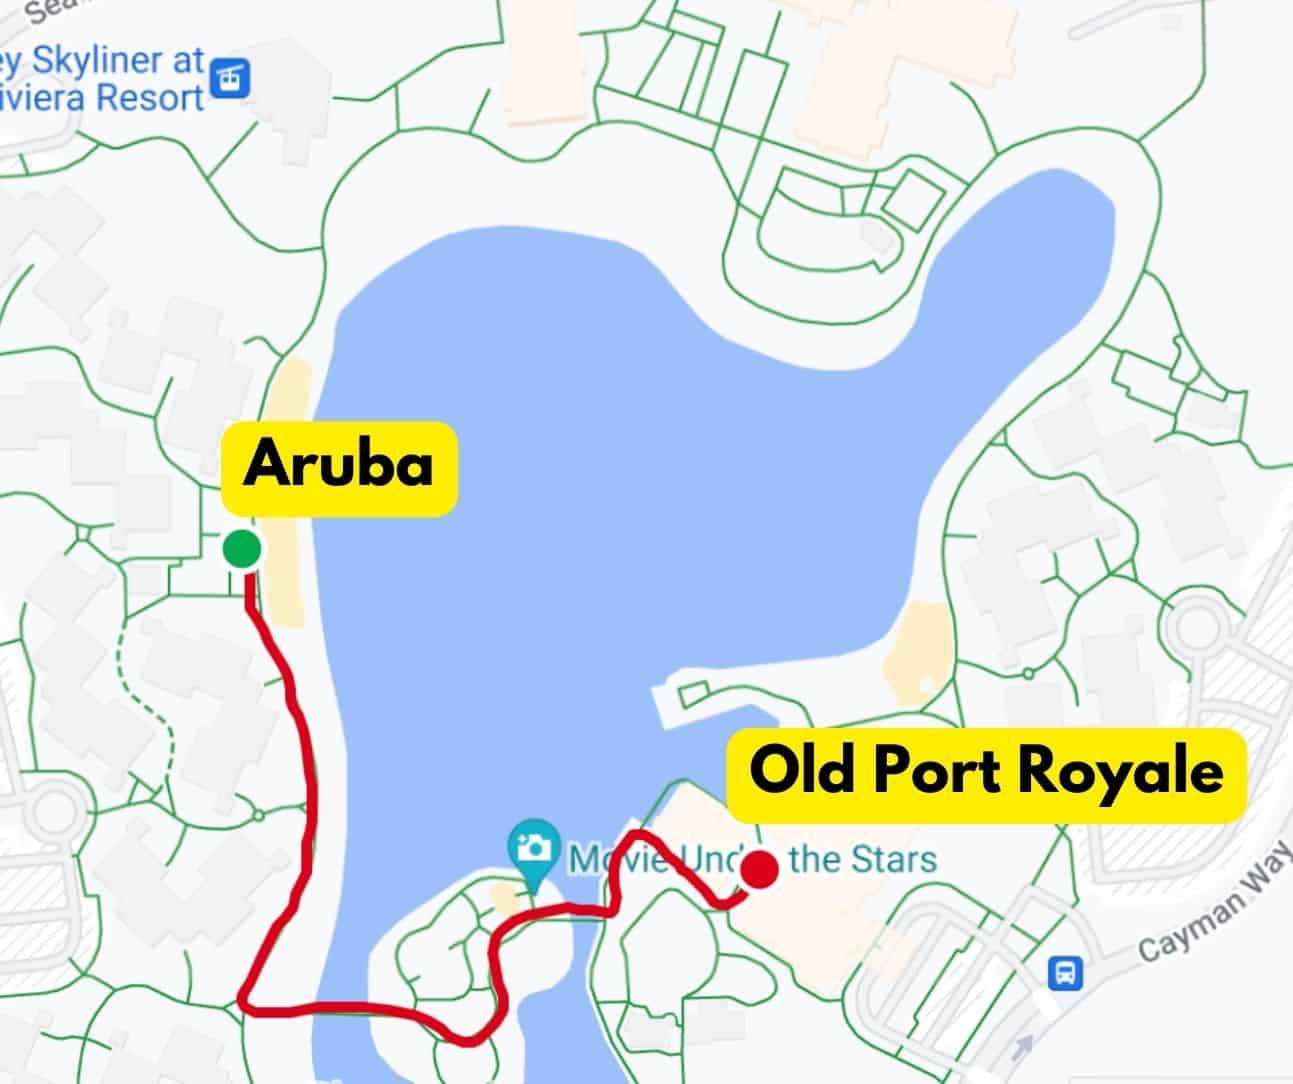 walking distance from Aruba to Old Port Royale 